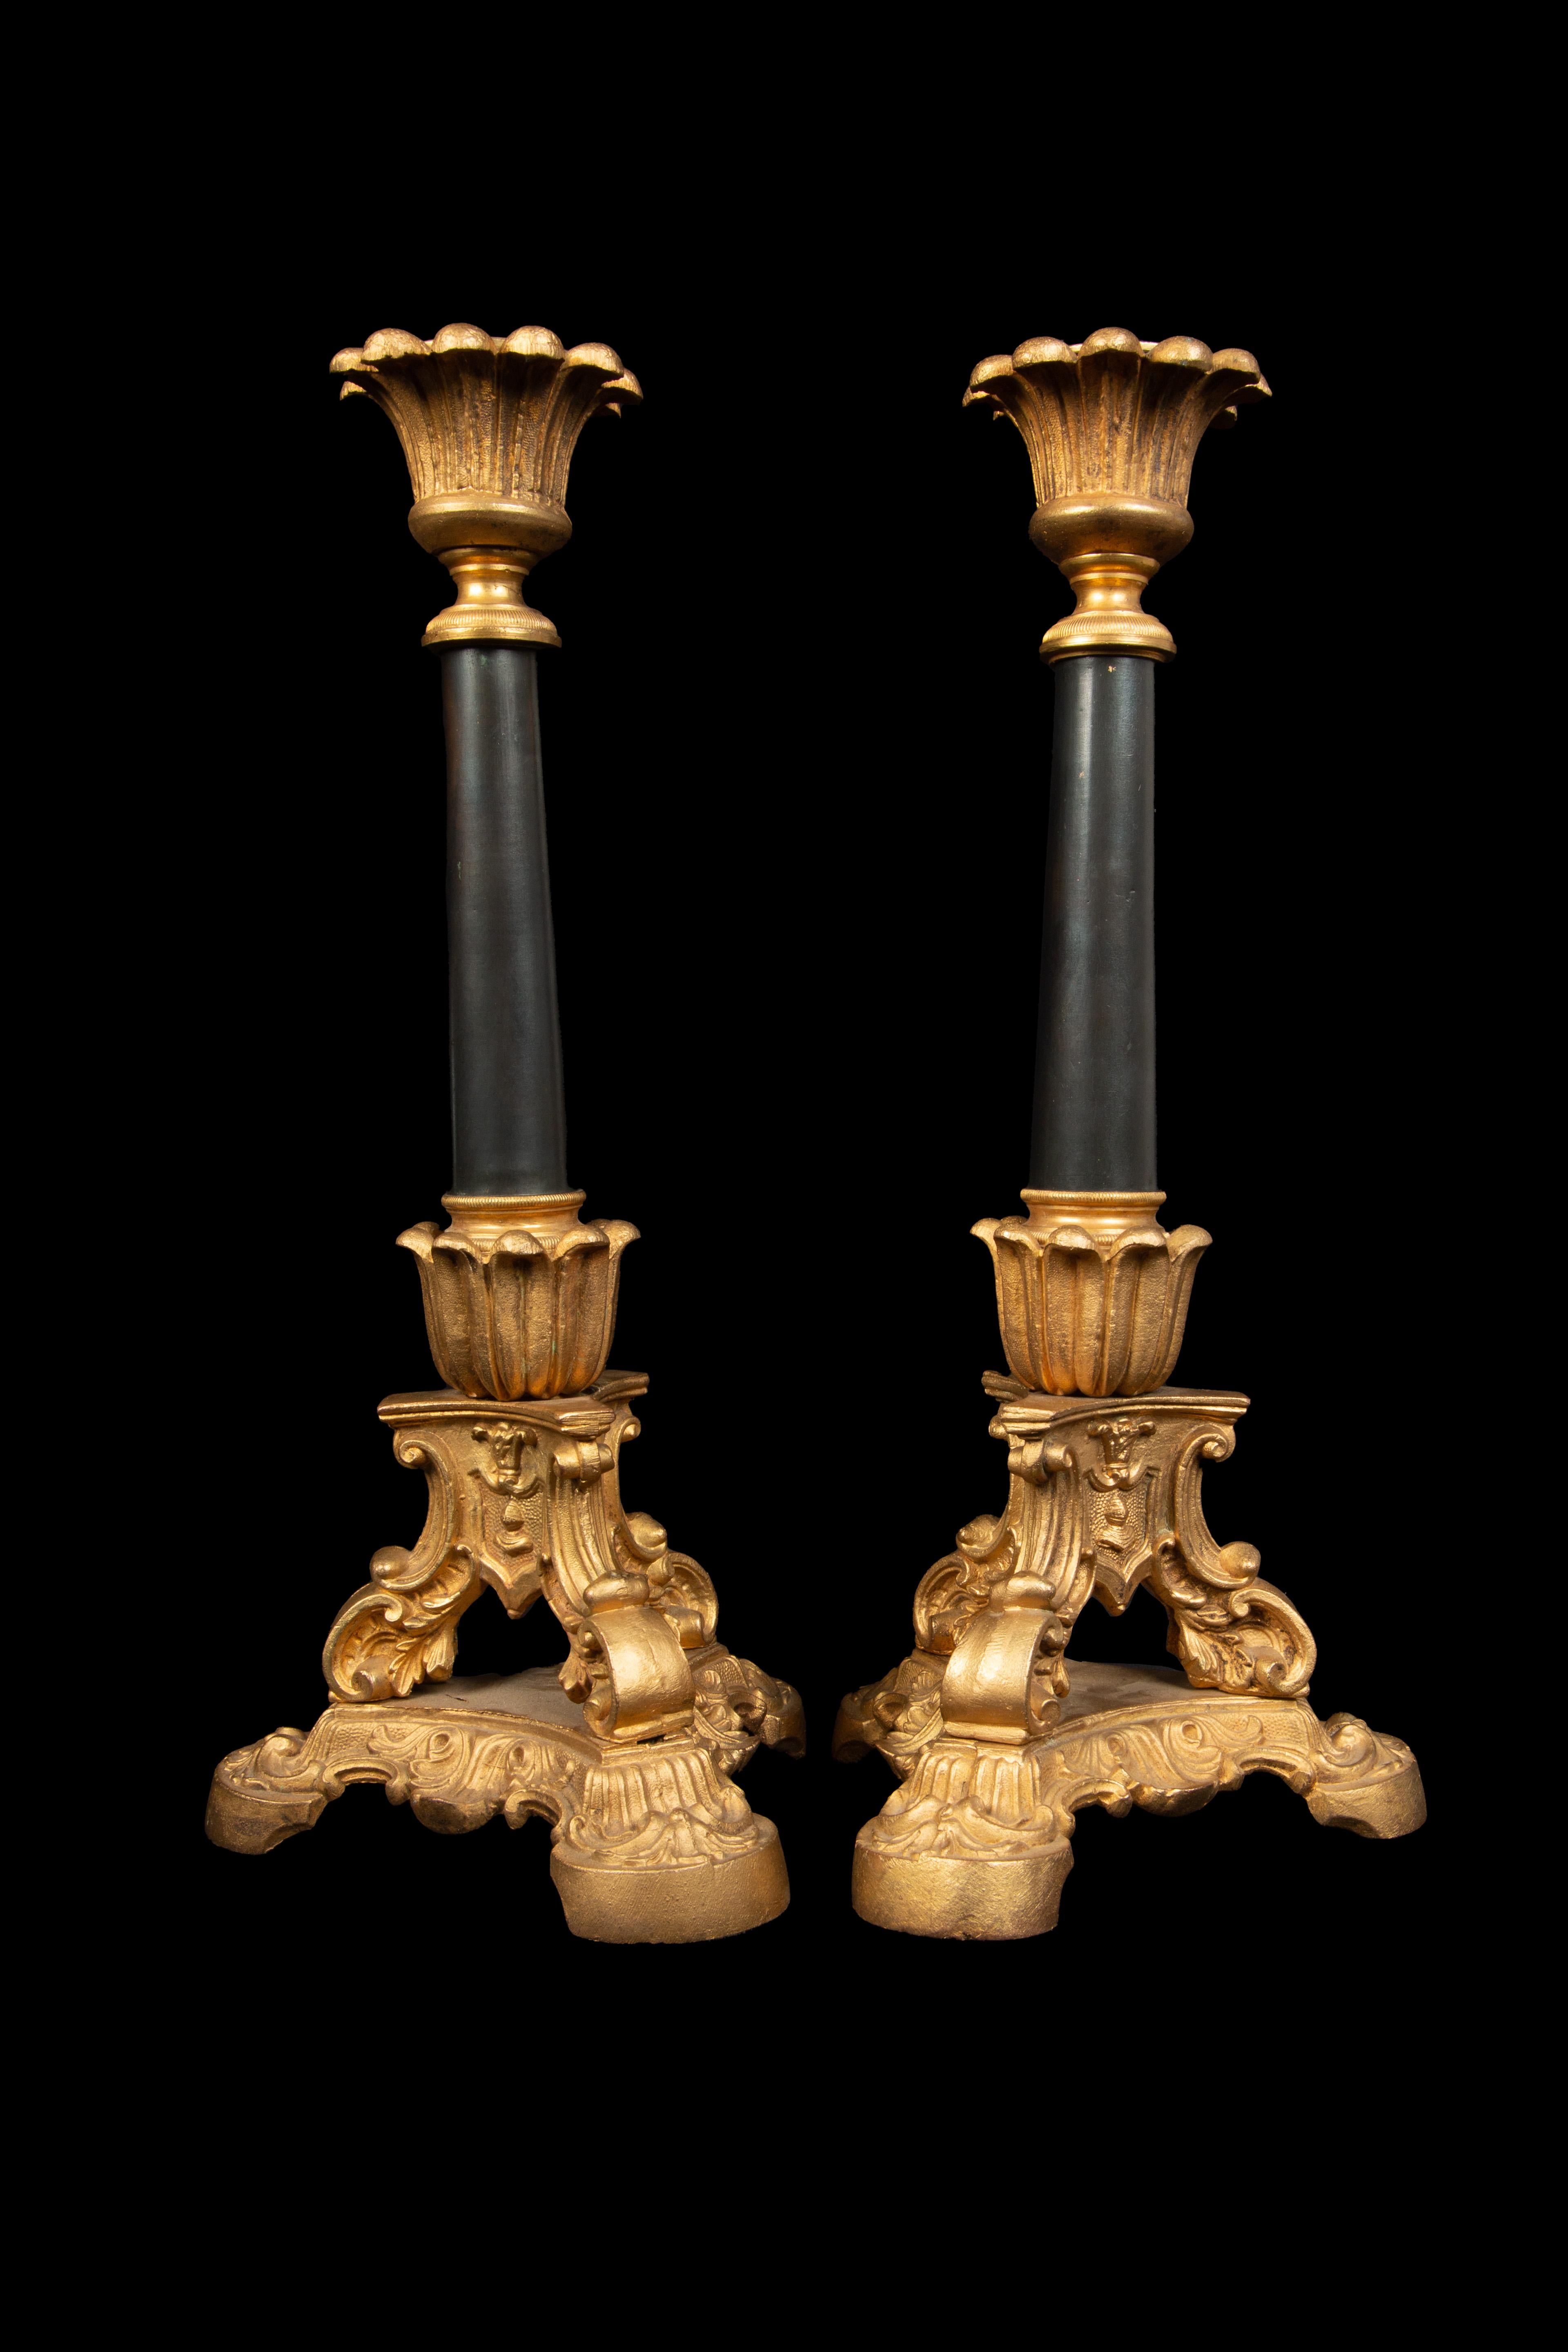 19th-century Candlesticks: Made of gilt bronze and black patinated metal, these 13-inch tall candlesticks feature an elegant tripod base. With their timeless appeal, they bring sophistication and historical charm to any space.